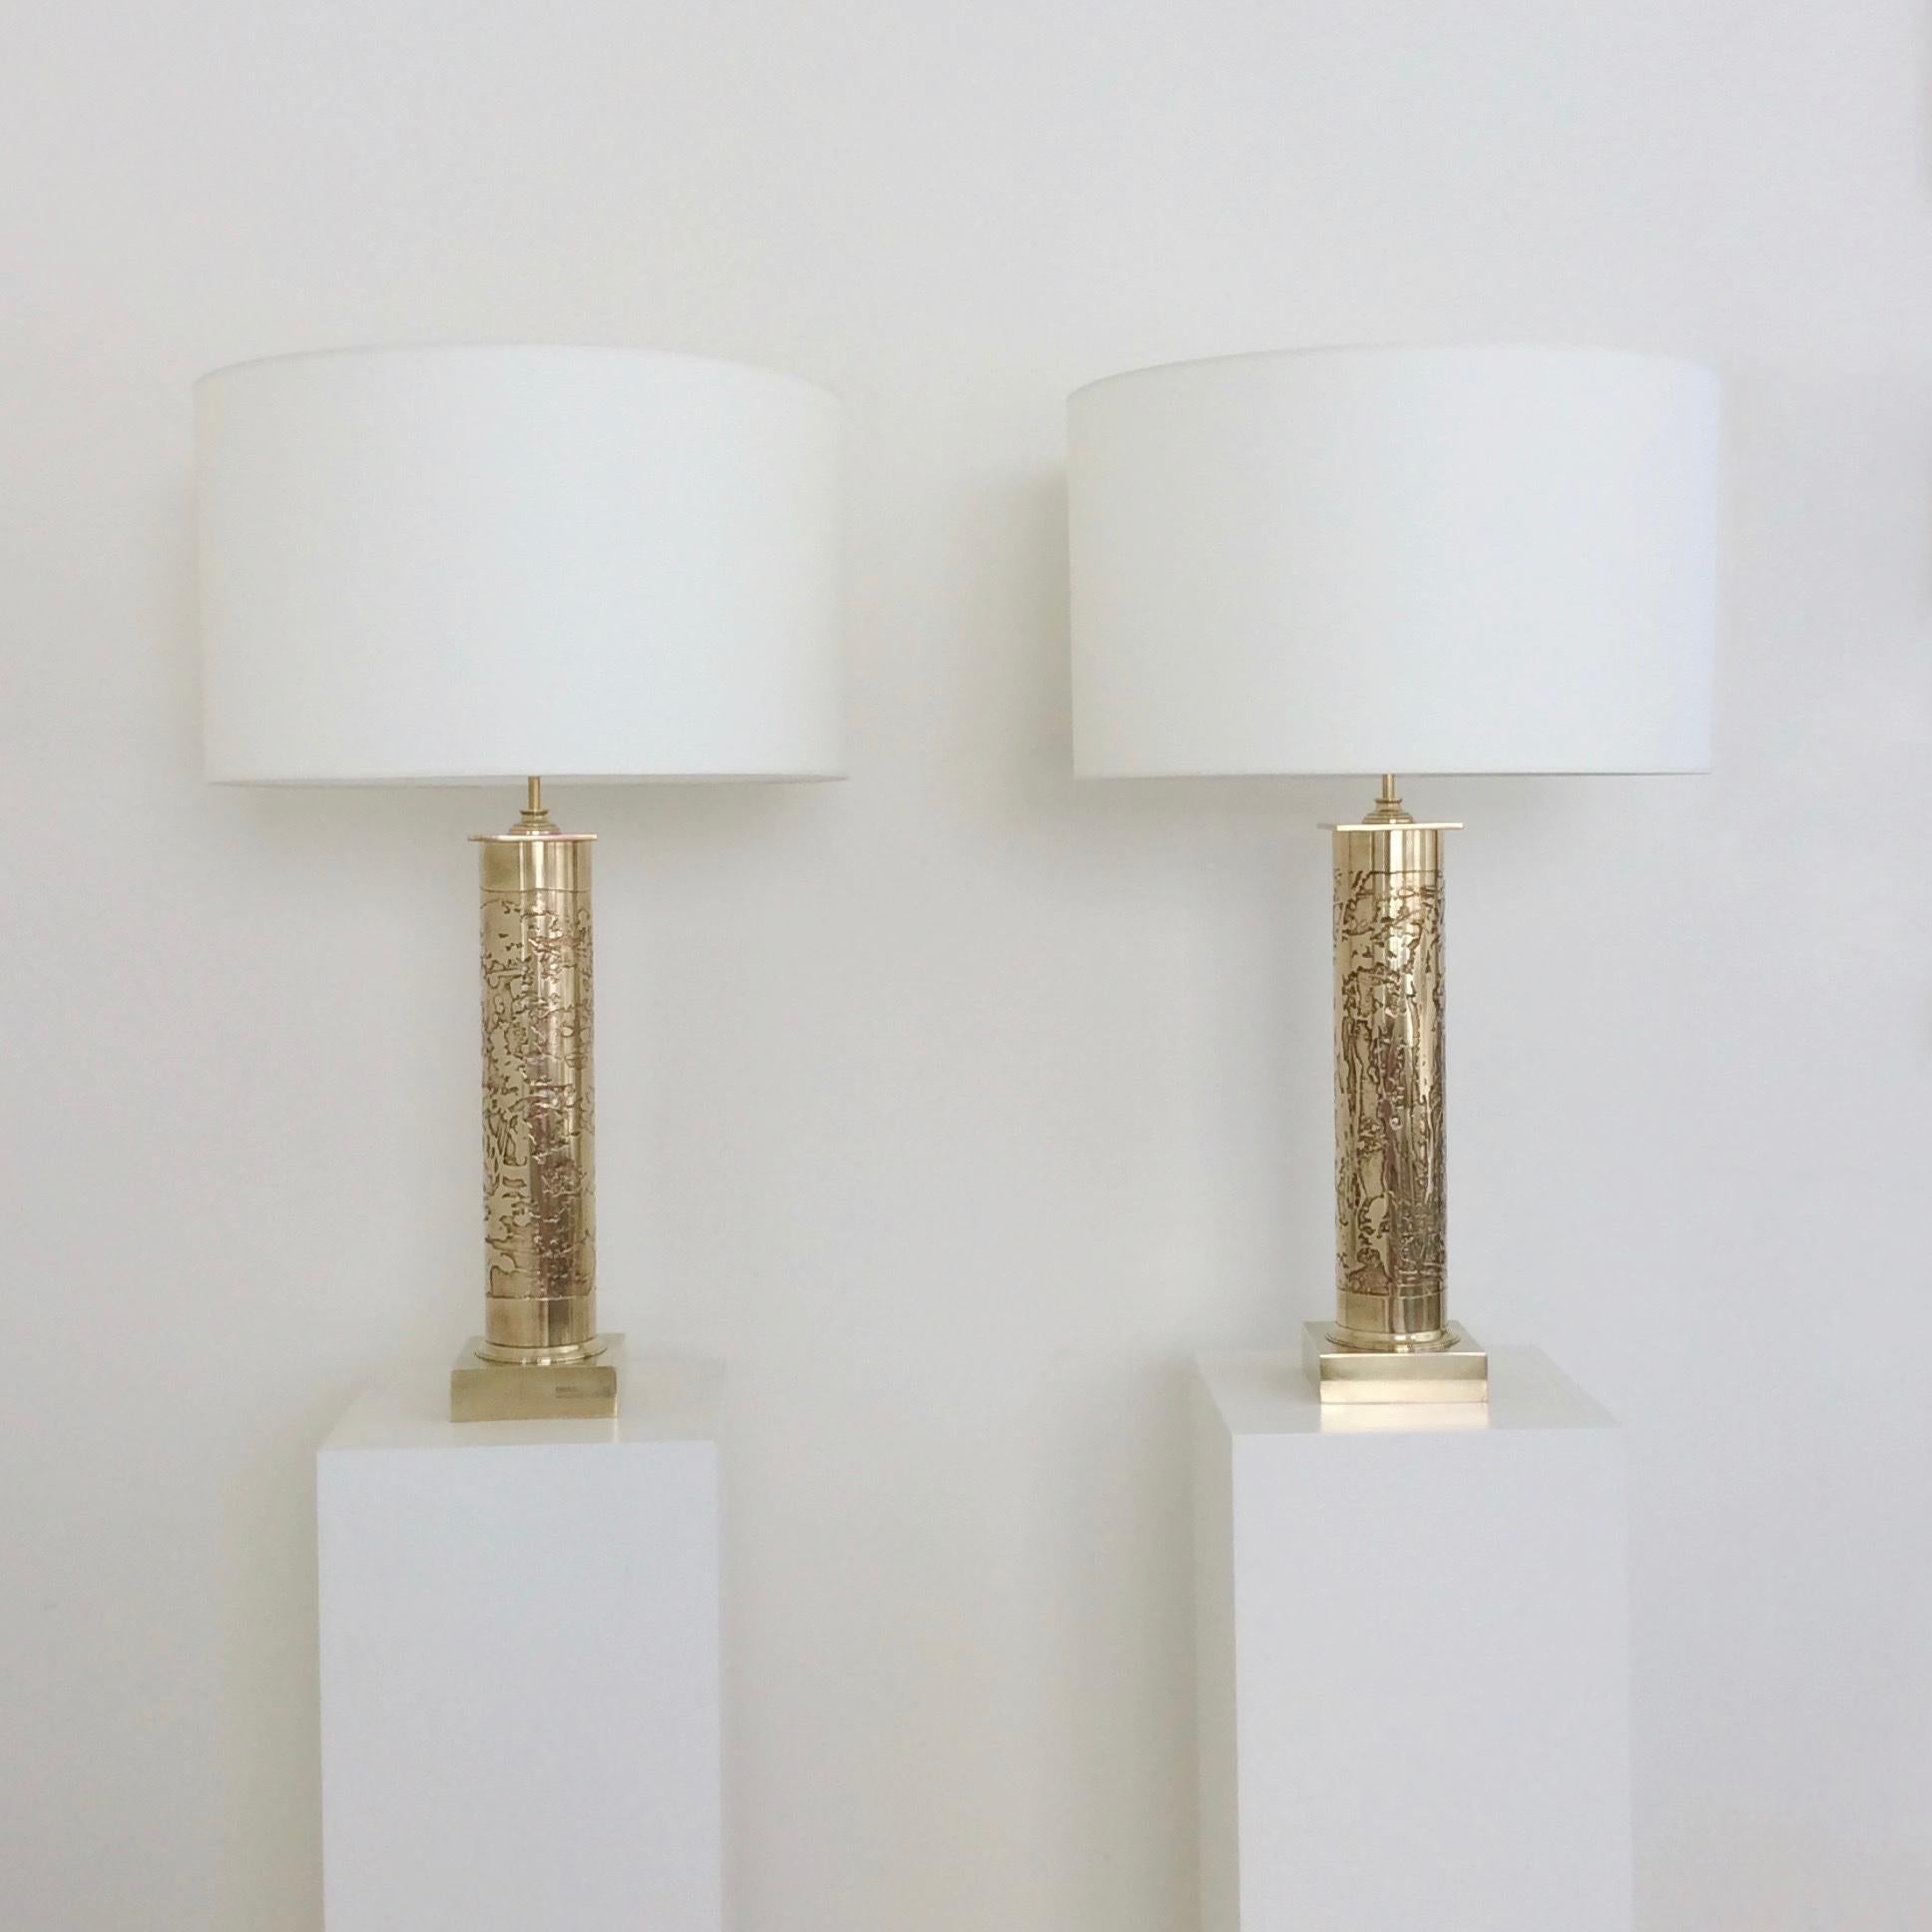 Late 20th Century Willy Daro Attributed Design Pair of Table Lamps, circa 1975, Belgium